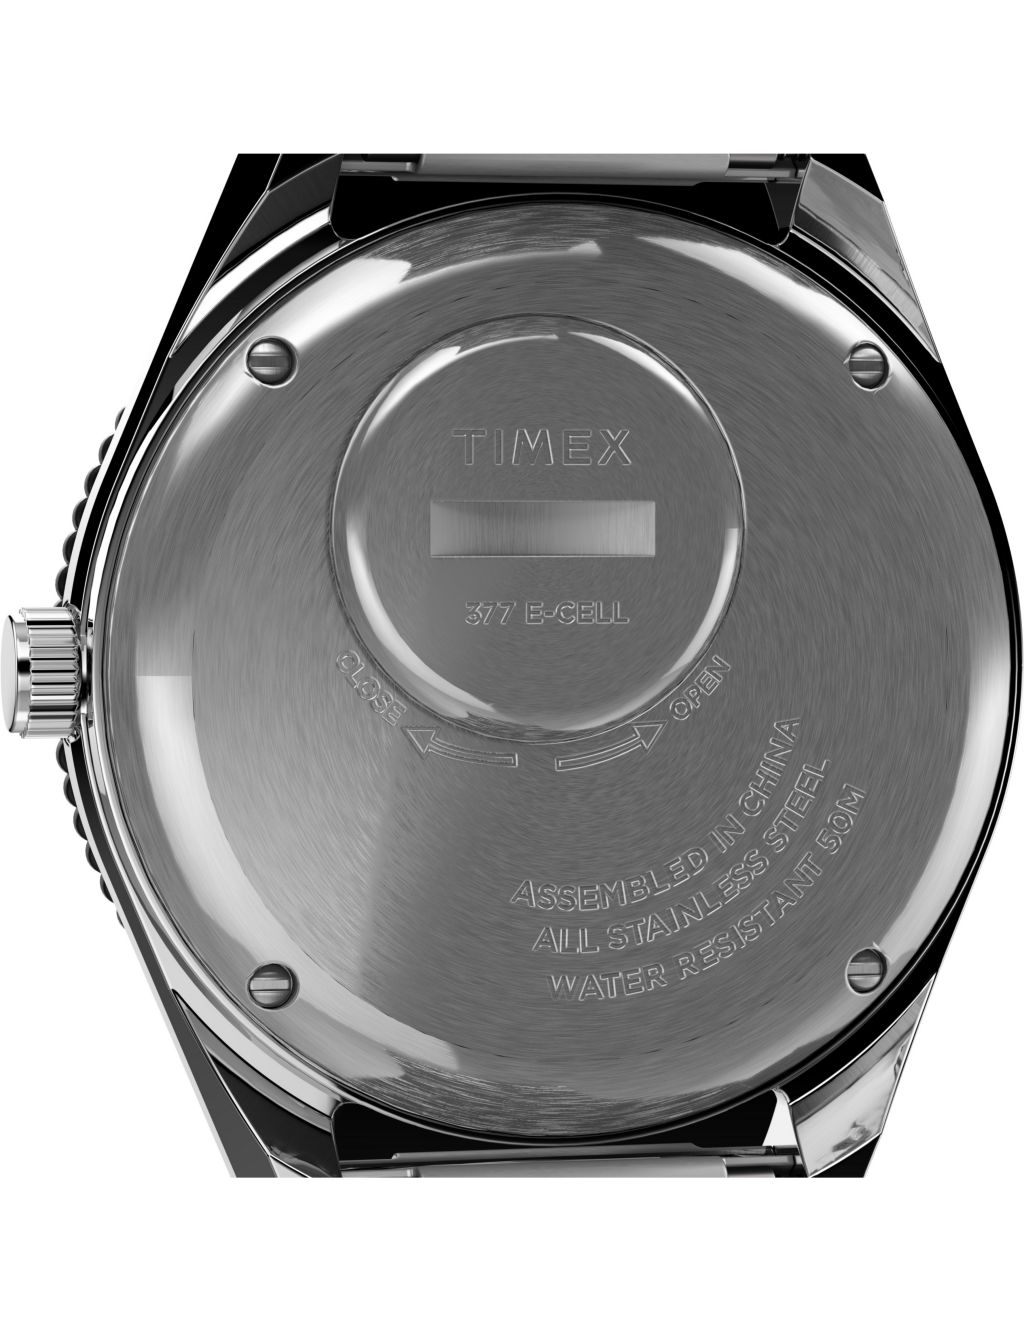 Timex Q Diver Stainless Steel Watch image 3